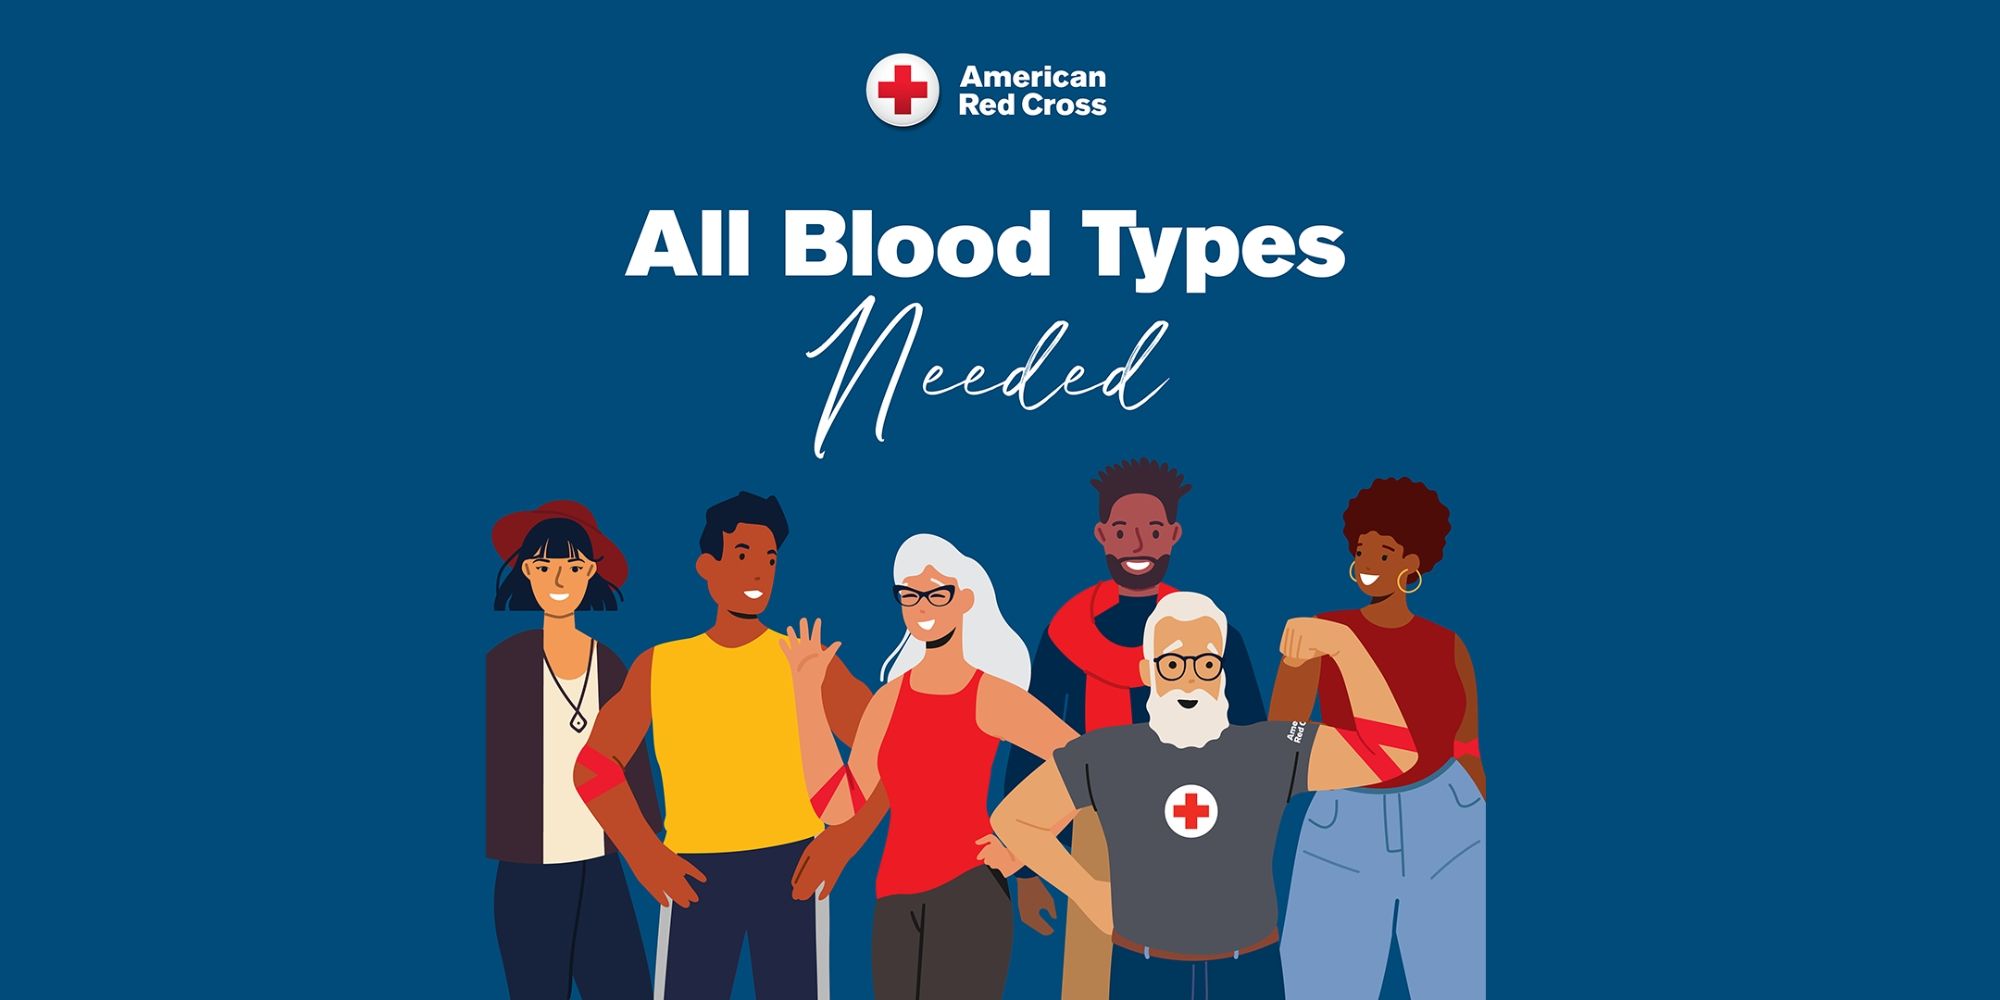 Dark Blue background with 6 people. Above people words "All Blood Types Needed"